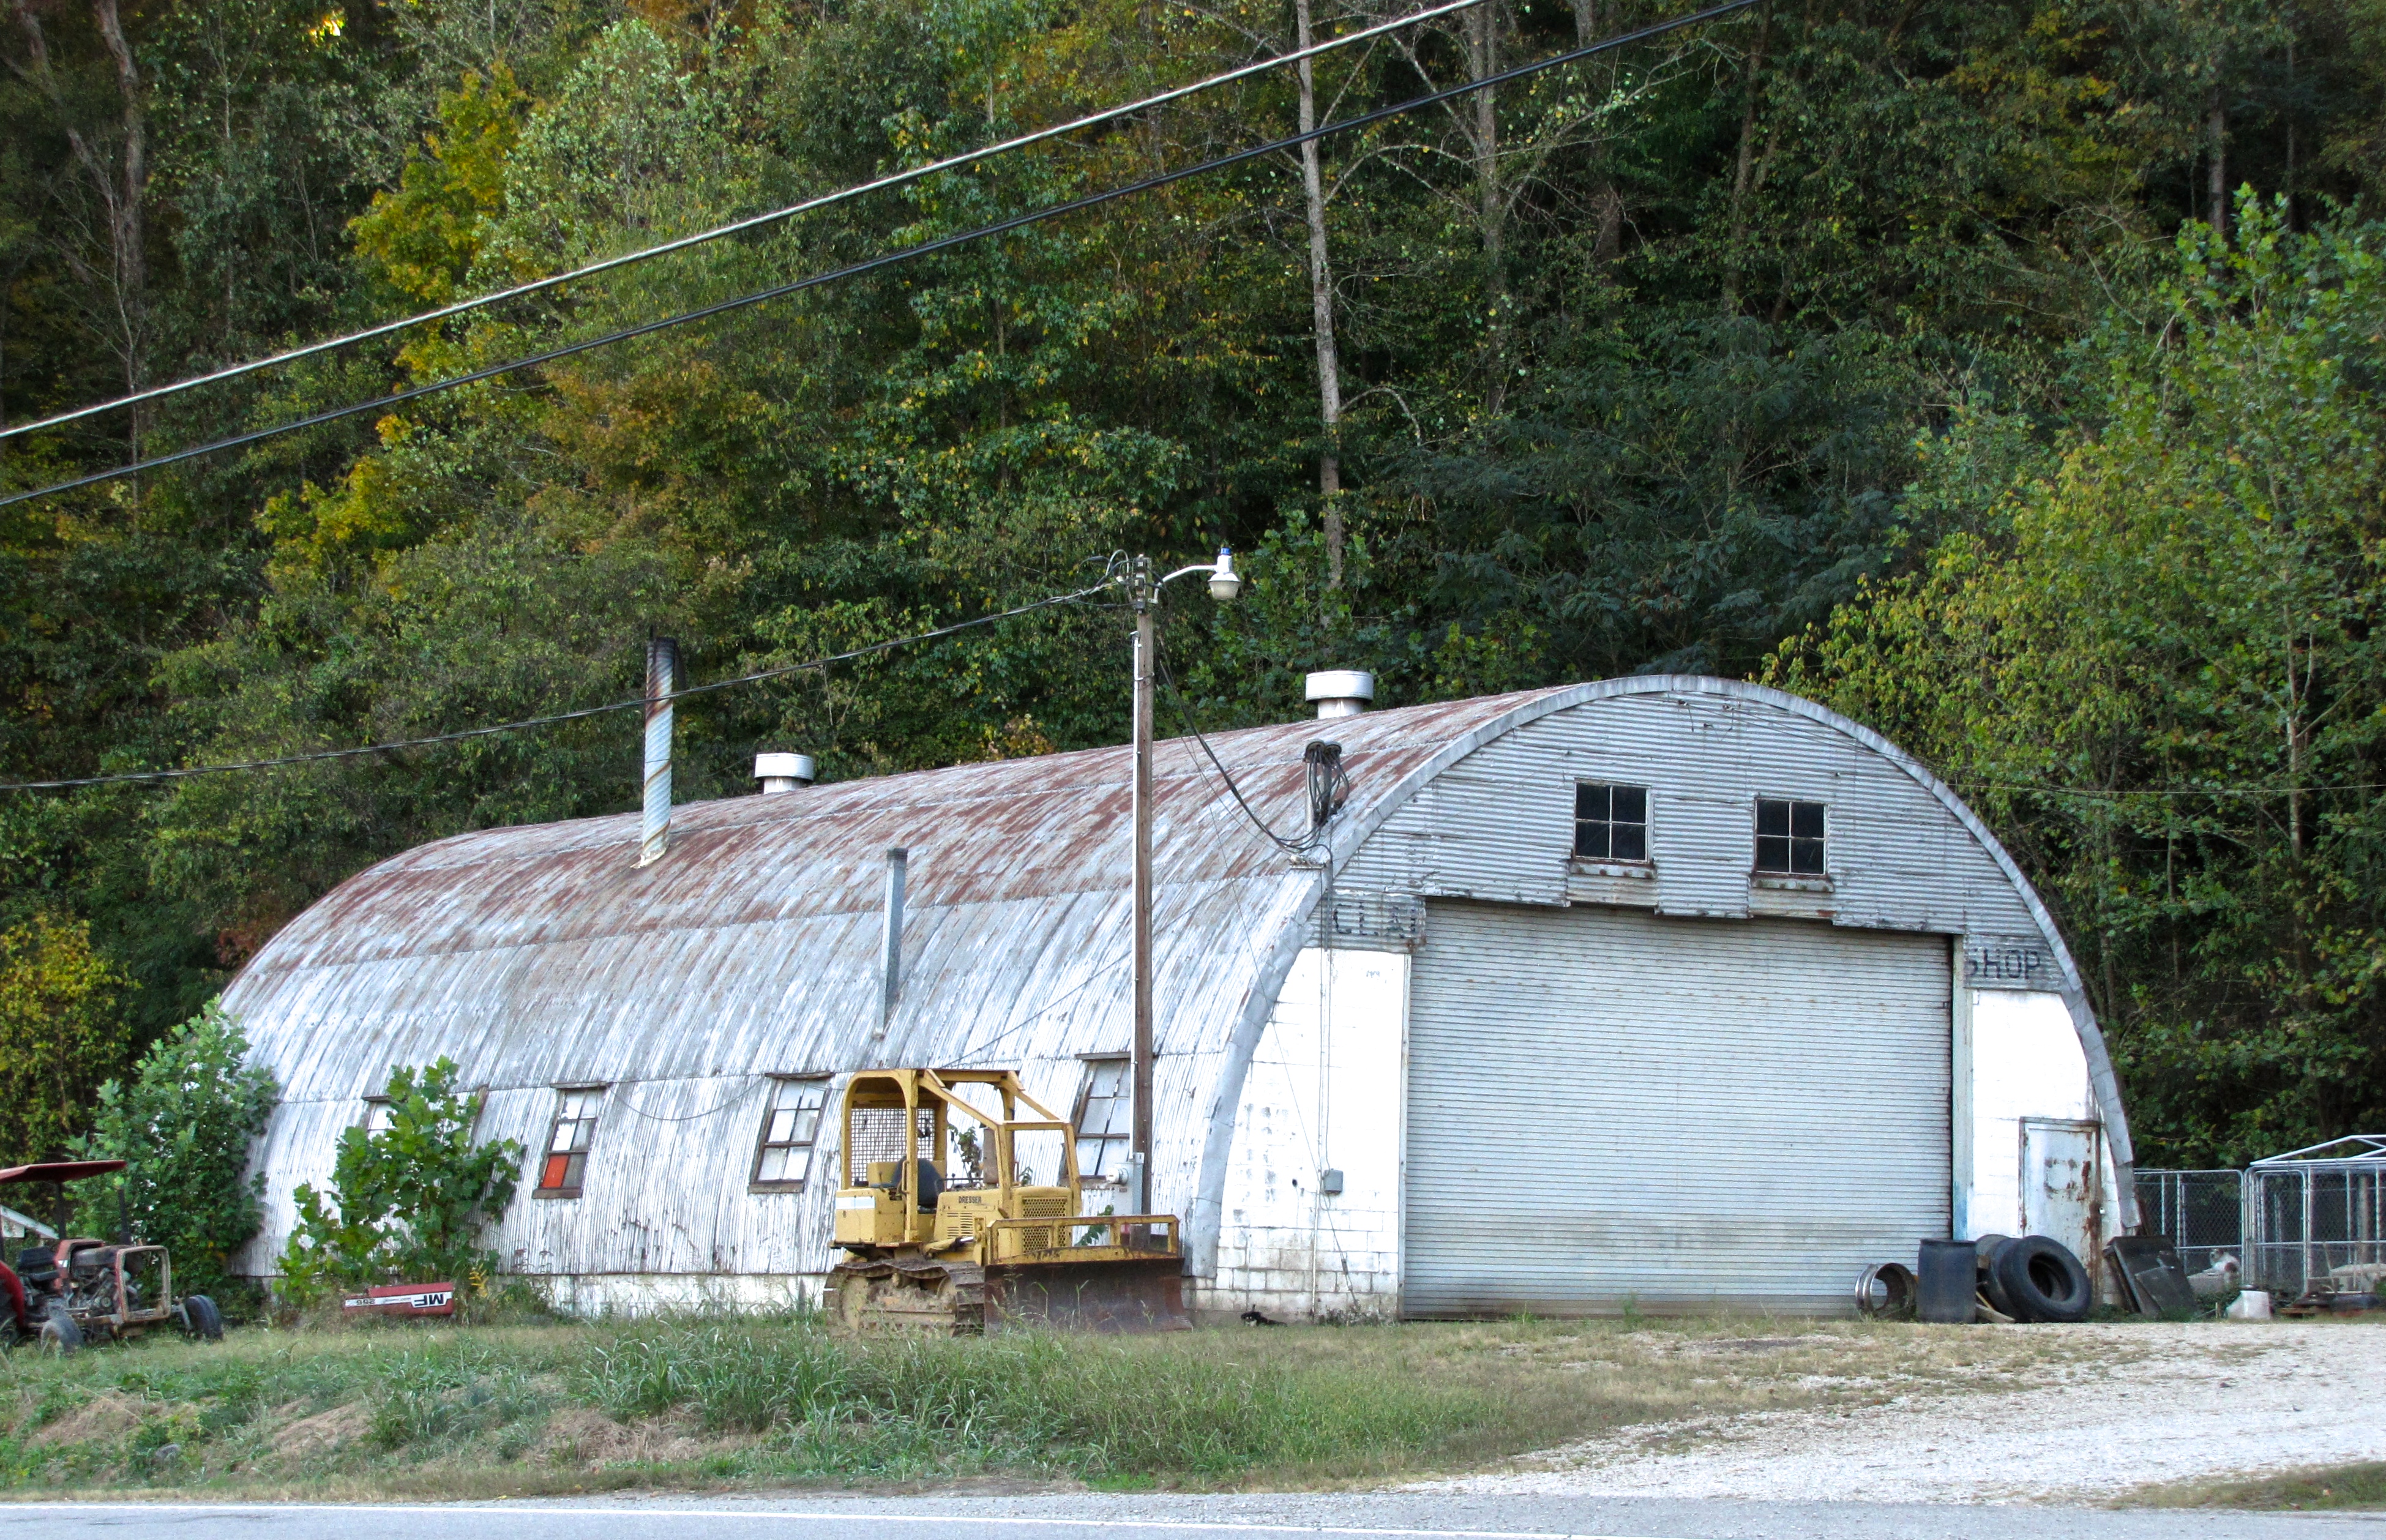 quonset hut in West Haven, CT